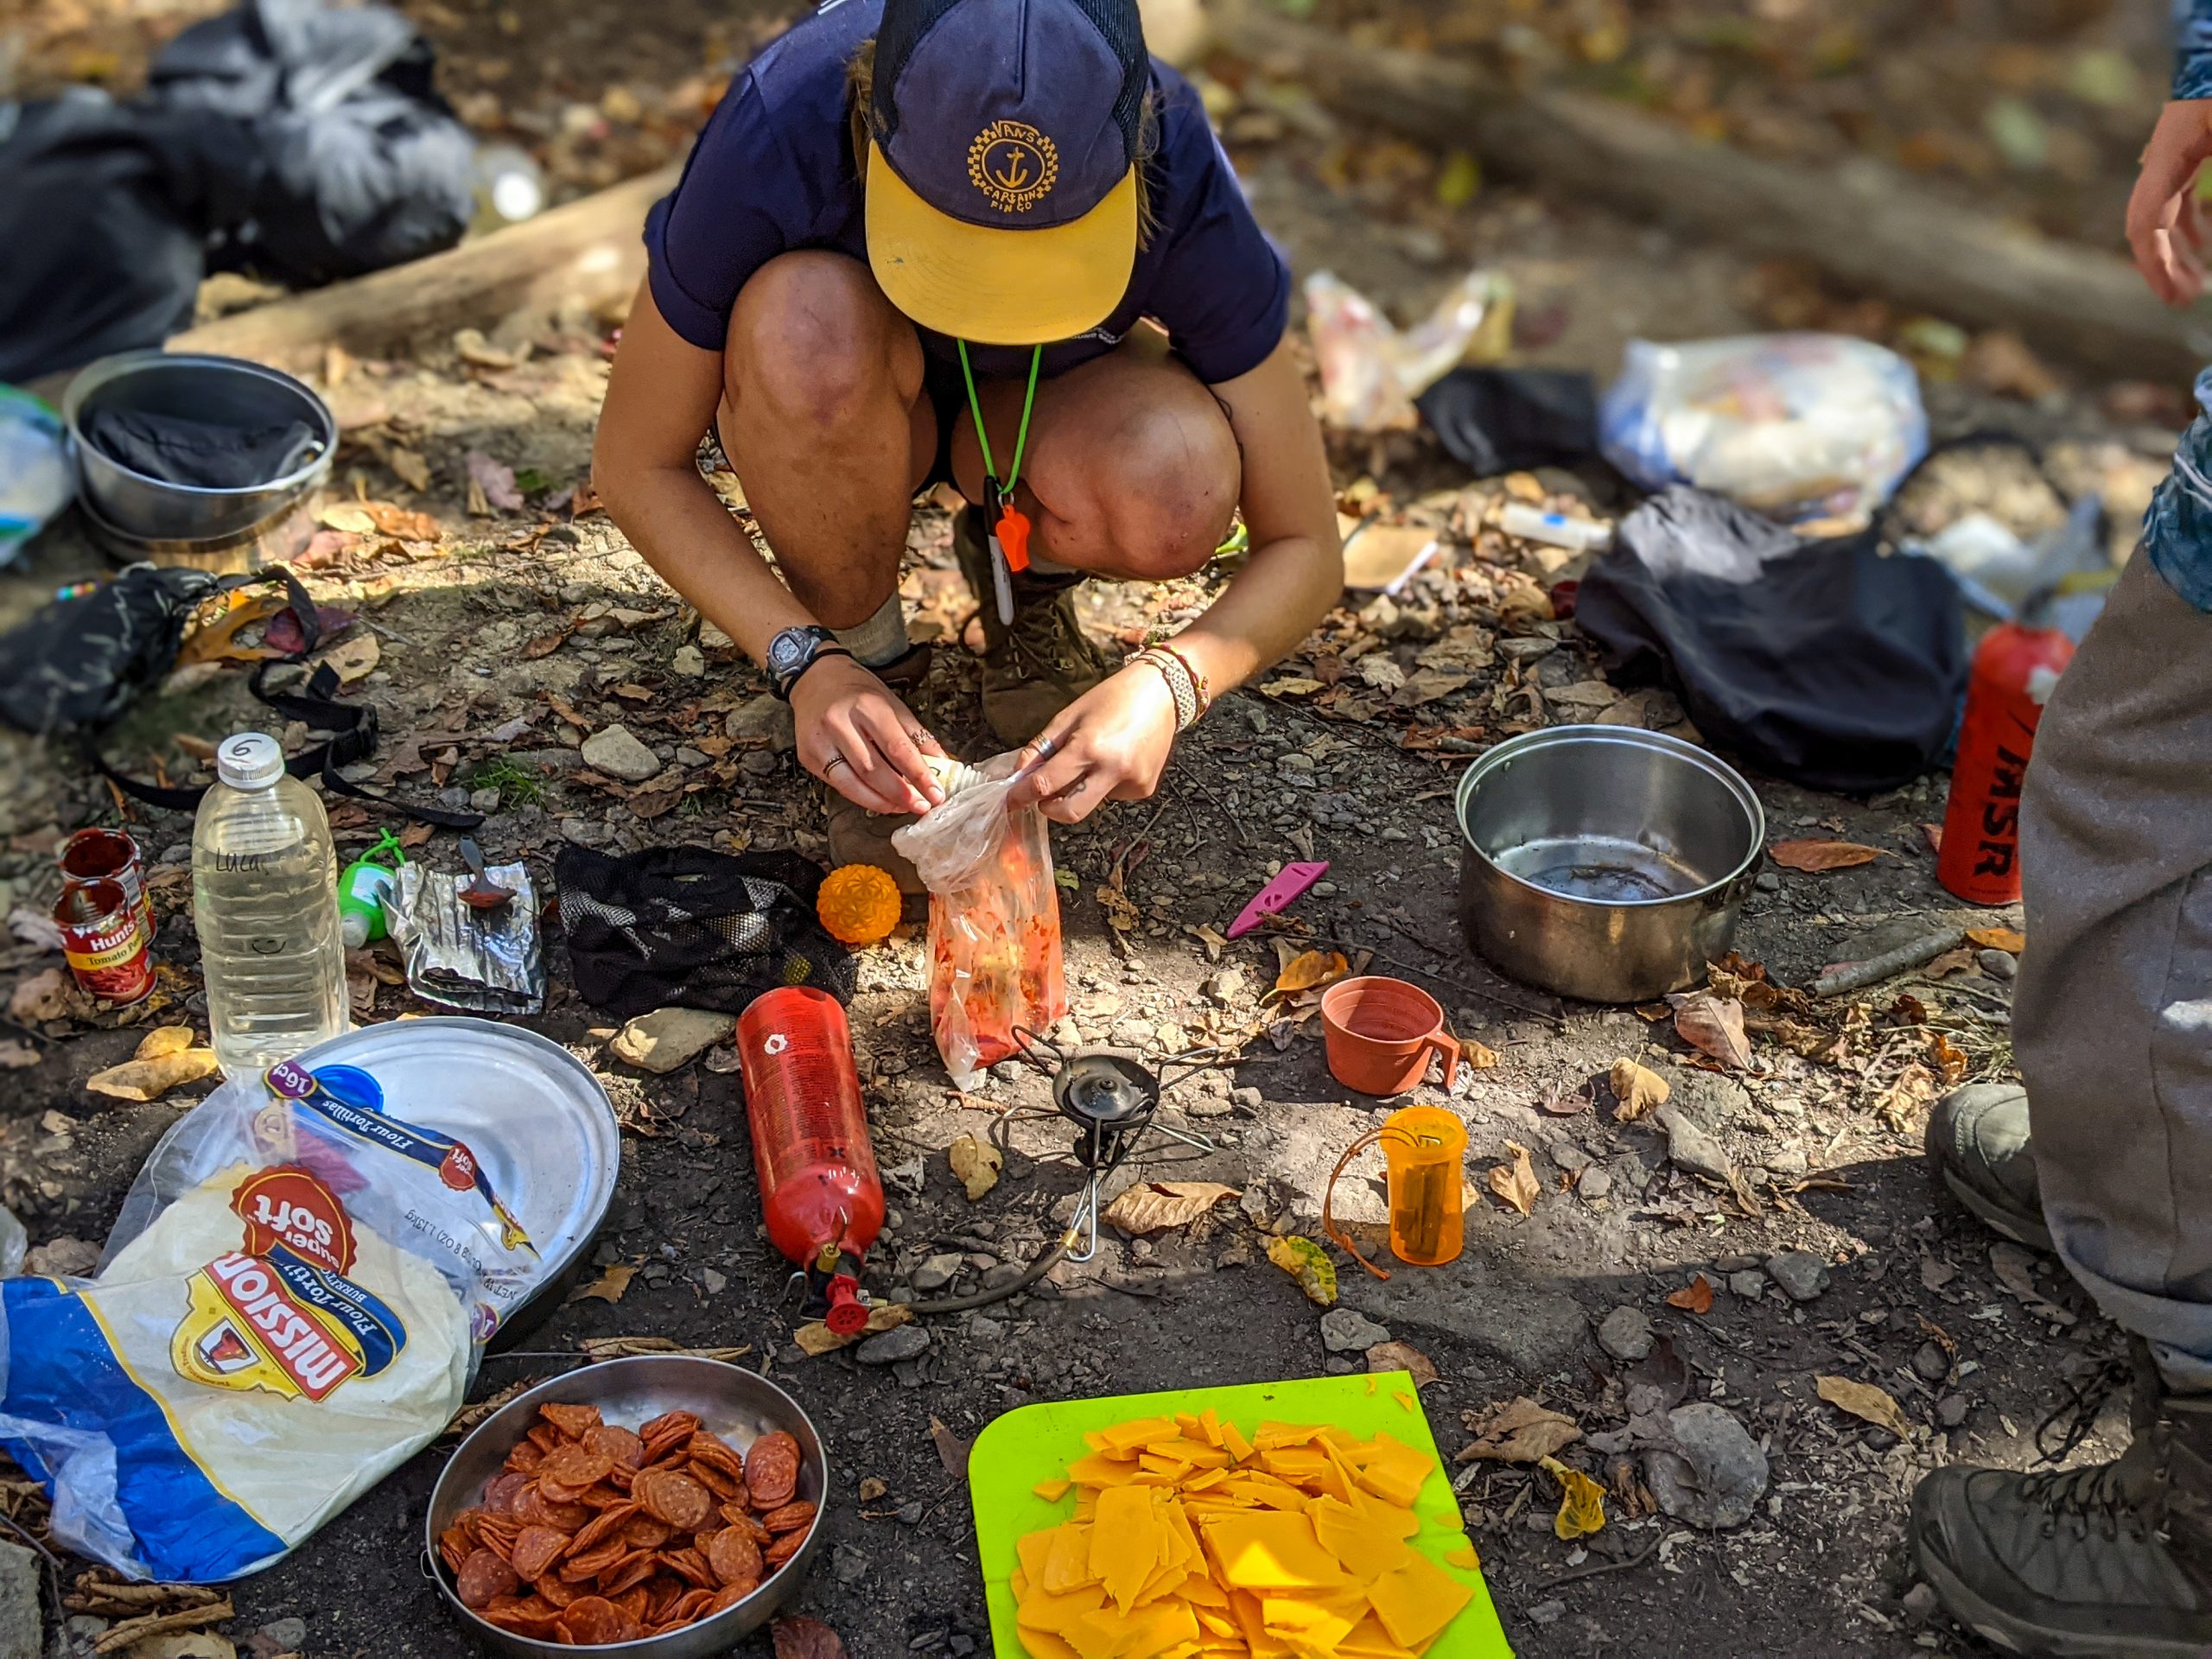 How Outward Bound is Different from Summer Camp: A student prepares a meal outside on the ground near a camp stove.